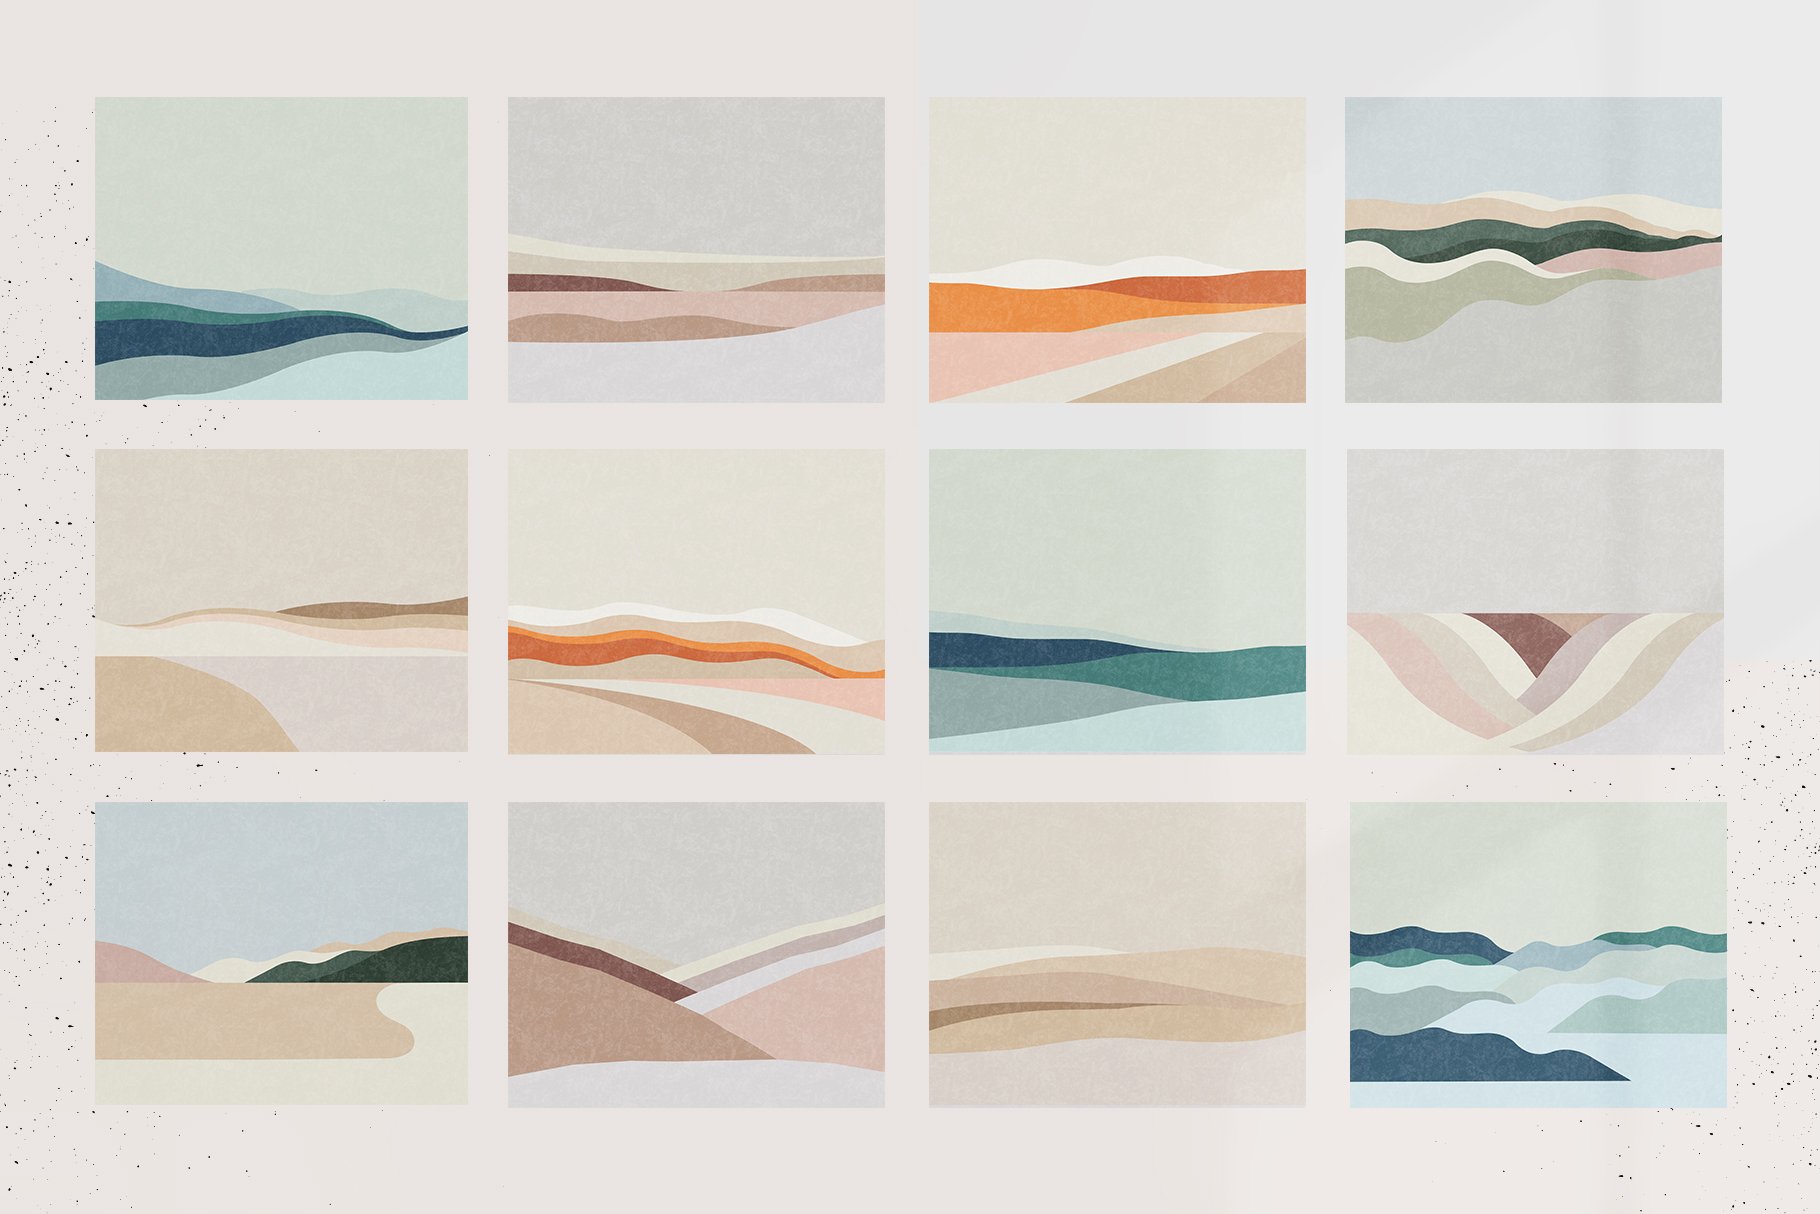 Cool landscapes collection in different colors mix.